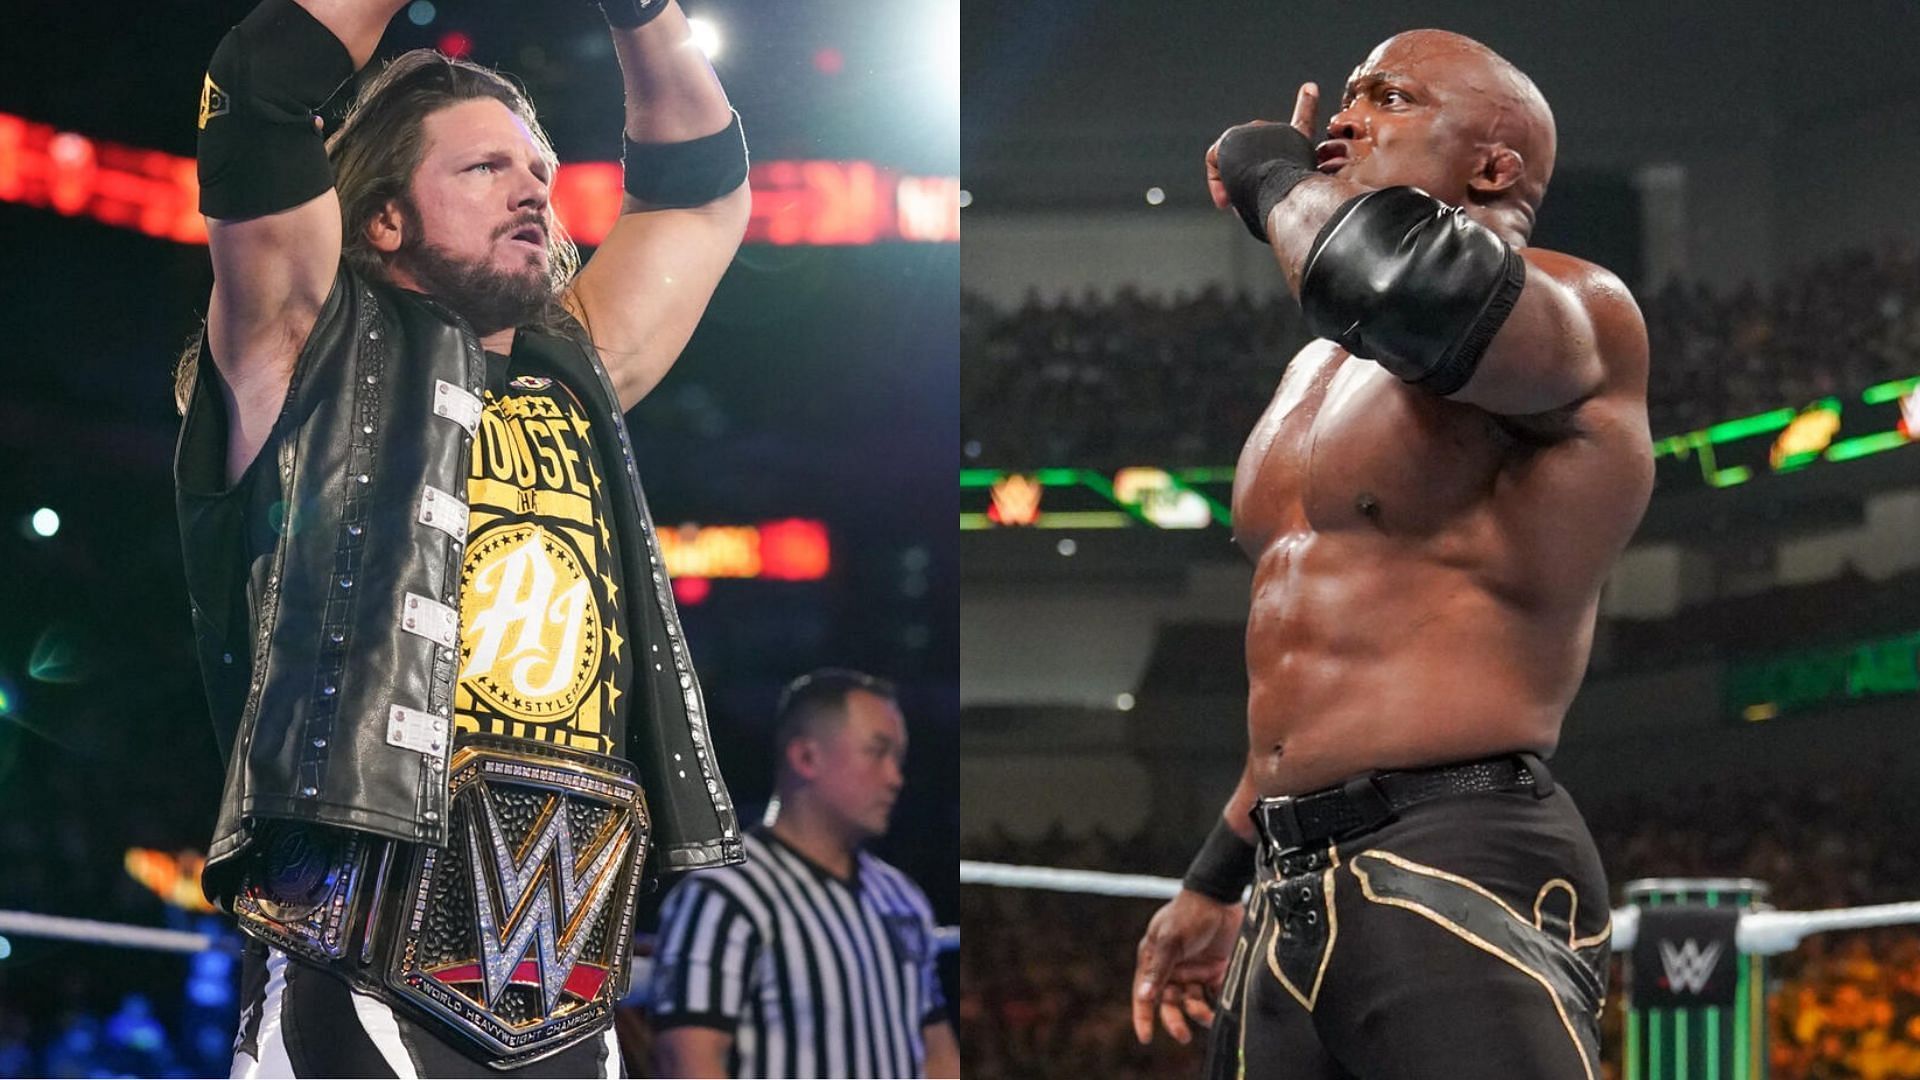 AJ Styles and Bobby Lashley are former WWE Champions (Credit: WWE)